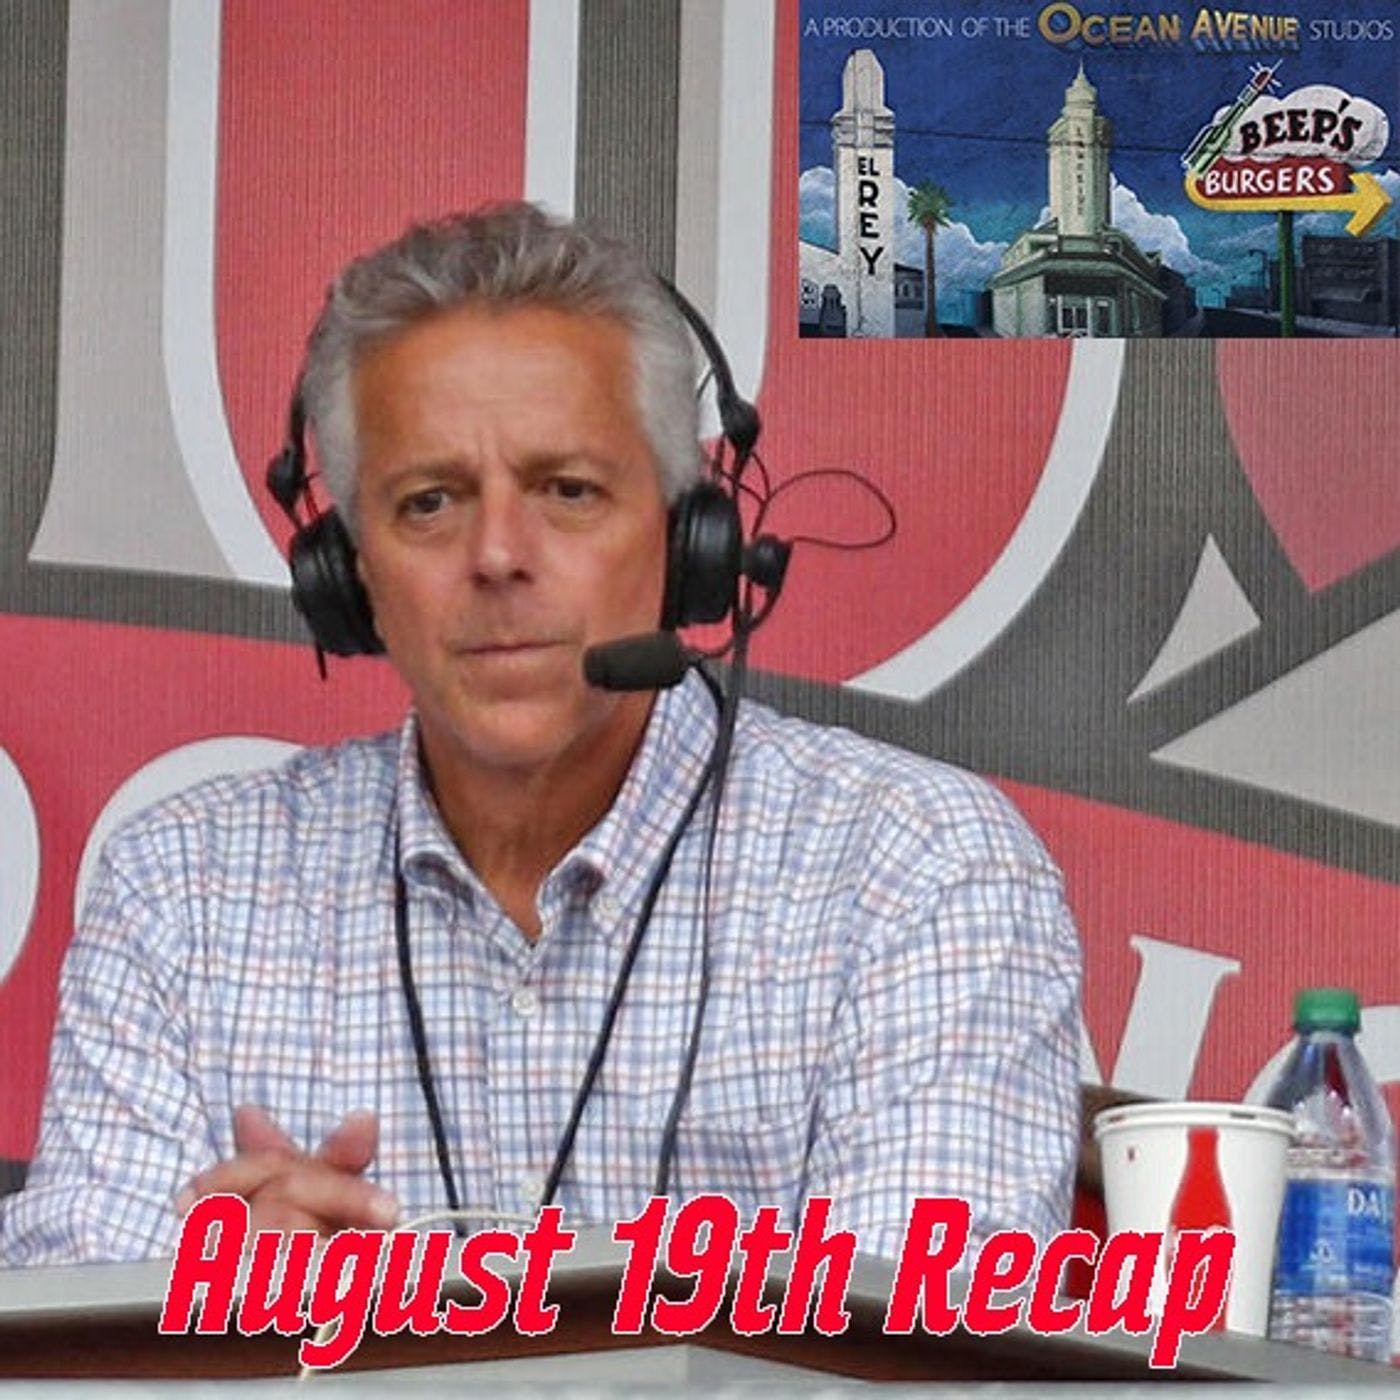 August 19th Recap, August 20th Preview, & Thom Brennaman Isn't Really Sorry For What He Said